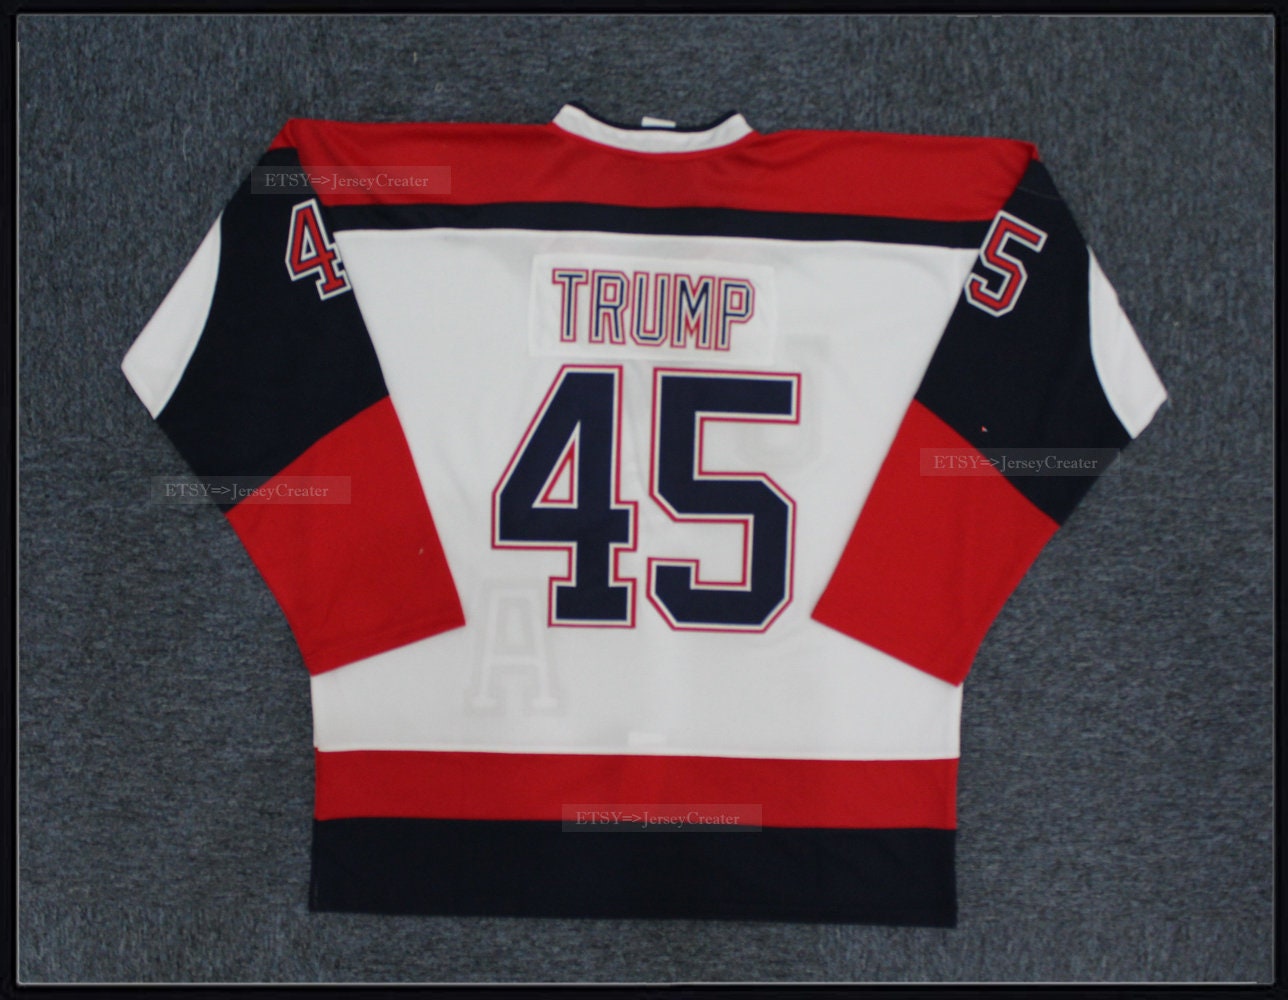 Minor League Hockey Jerseys For Sale at Ab D Cards